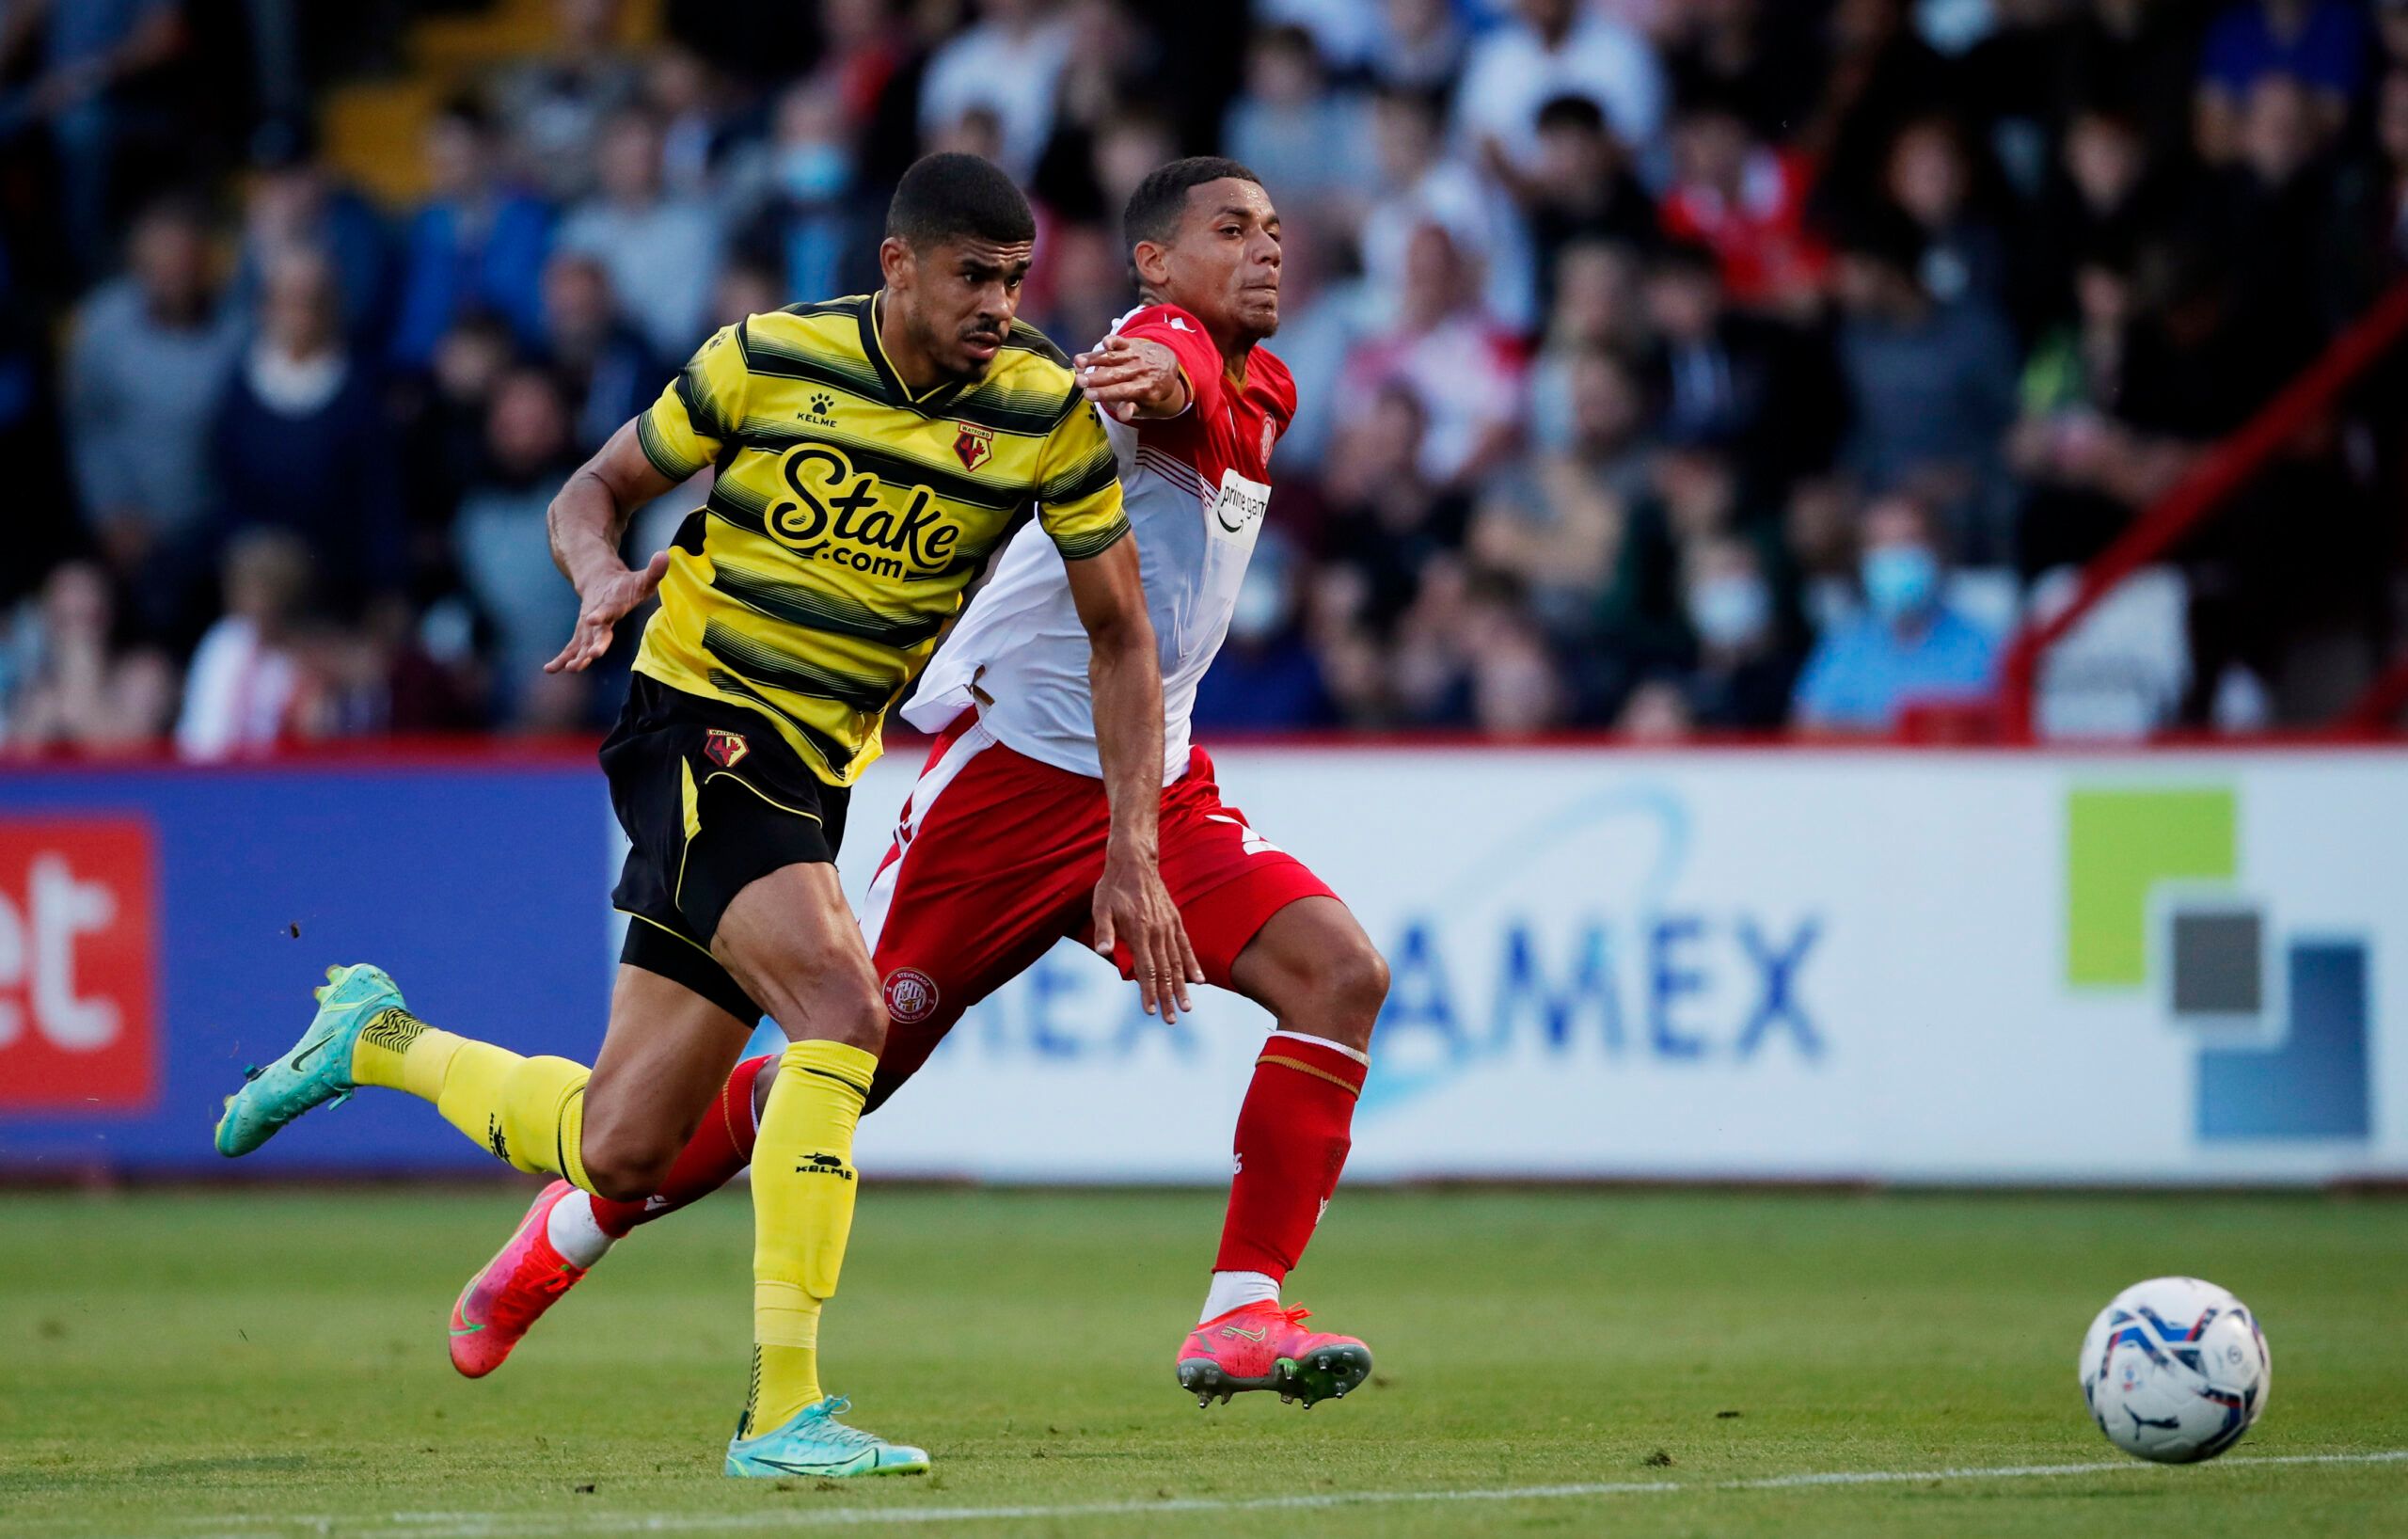 Soccer Football - Pre Season Friendly - Stevenage v Watford - The Lamex Stadium, Stevenage, Britain - July 27, 2021  Watford's Ashley Fletcher in action with Stevenage's Luther James-Wildin Action Images via Reuters/Andrew Couldridge